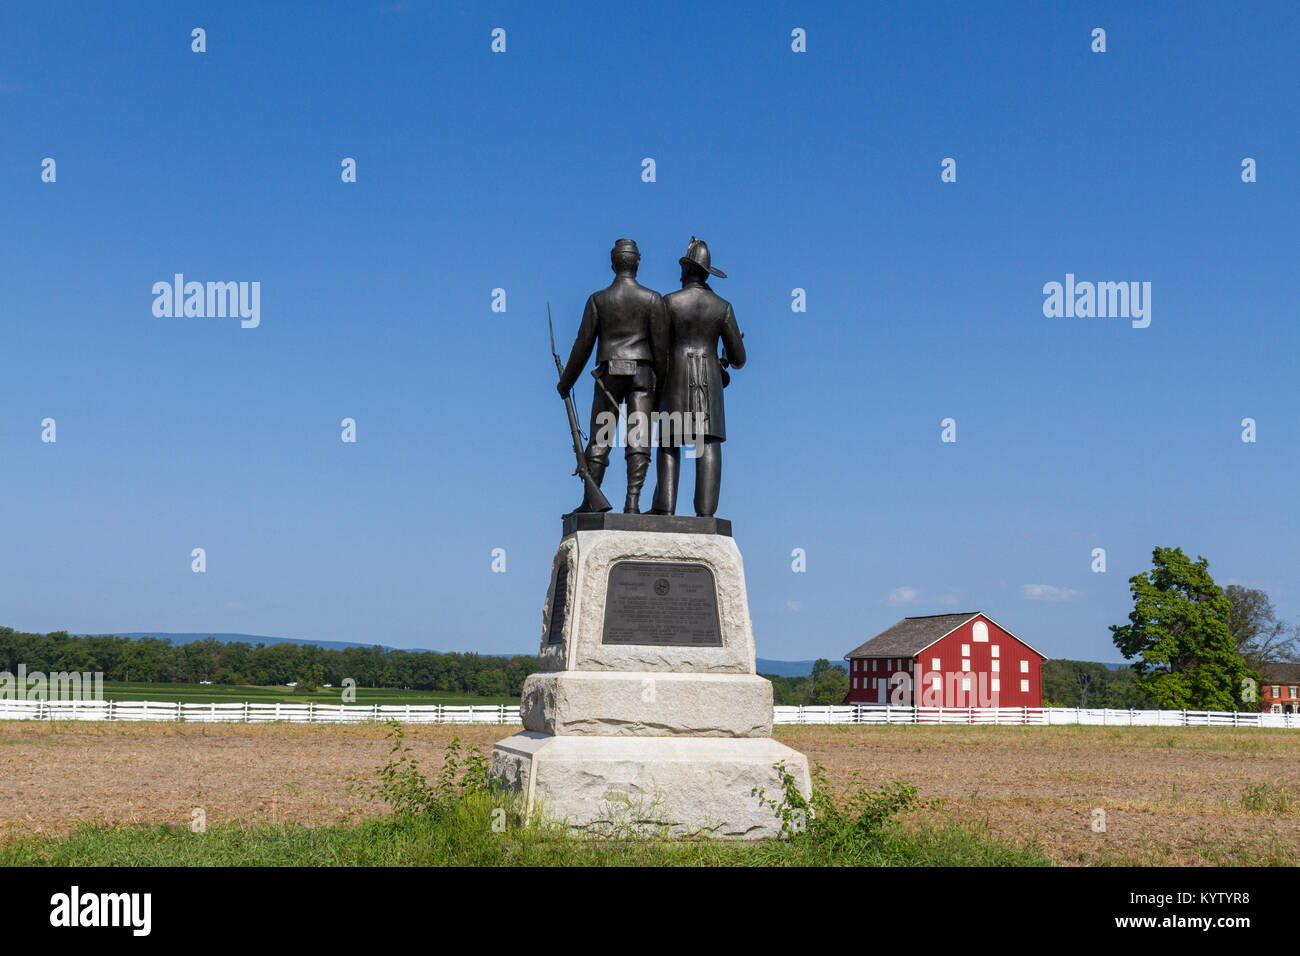 The 73rd New York Infantry Monument near the Peach Orchard, Gettysburg National Military Park, Pennsylvania, United States. Stock Photo